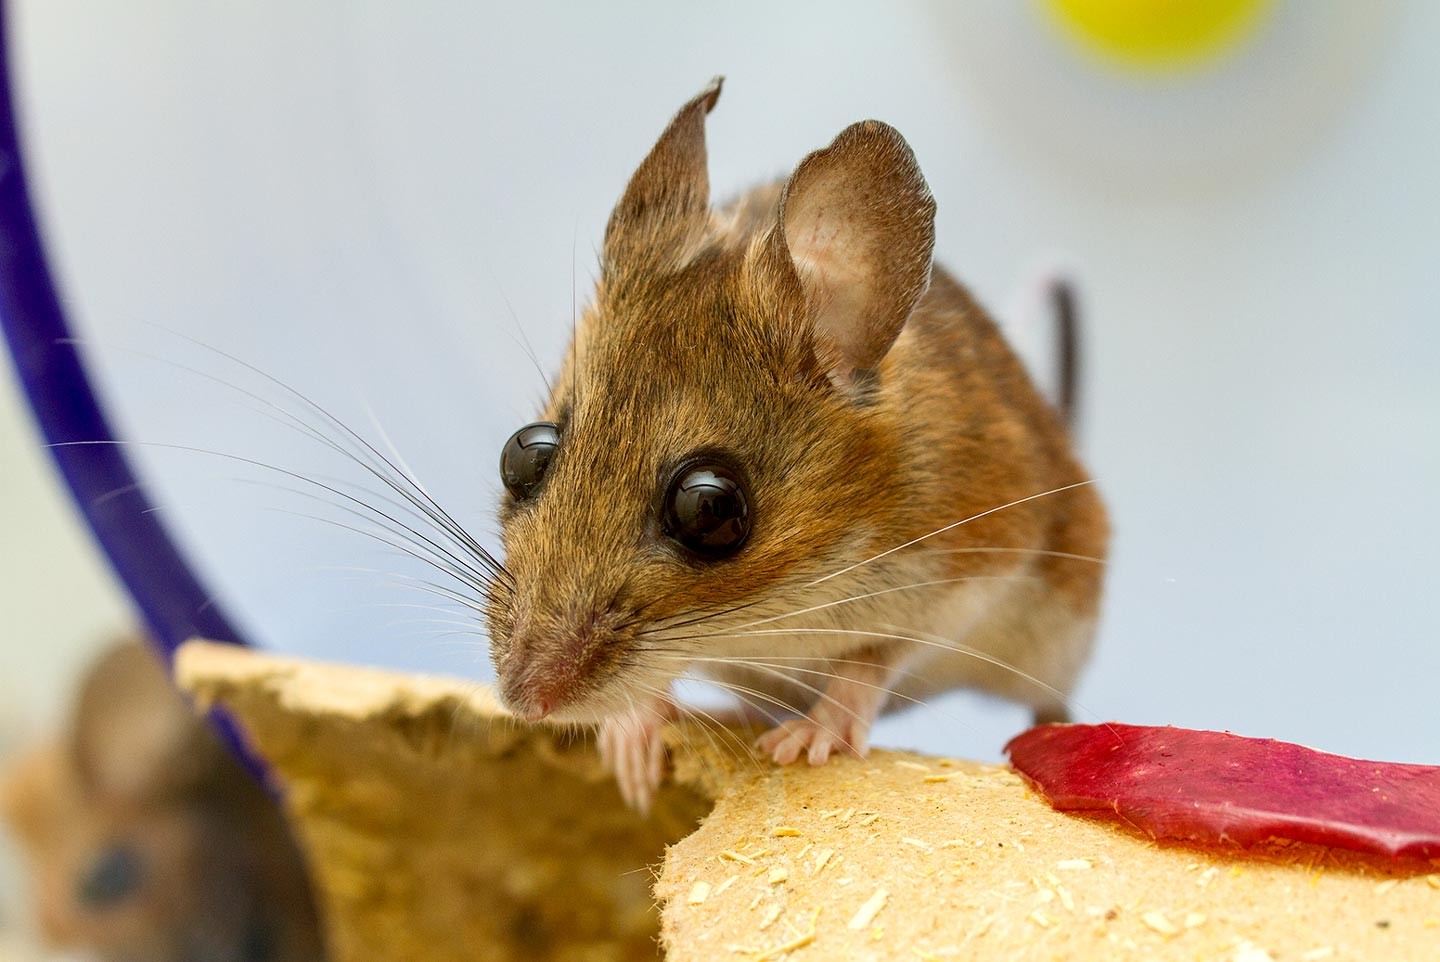 <p>Фото: &copy;&nbsp;<a href="https://en.wikipedia.org/wiki/White-footed_mouse#/media/File:Captive-White-Footed-Mouse.jpg" target="_blank">wikipedia.org</a></p>